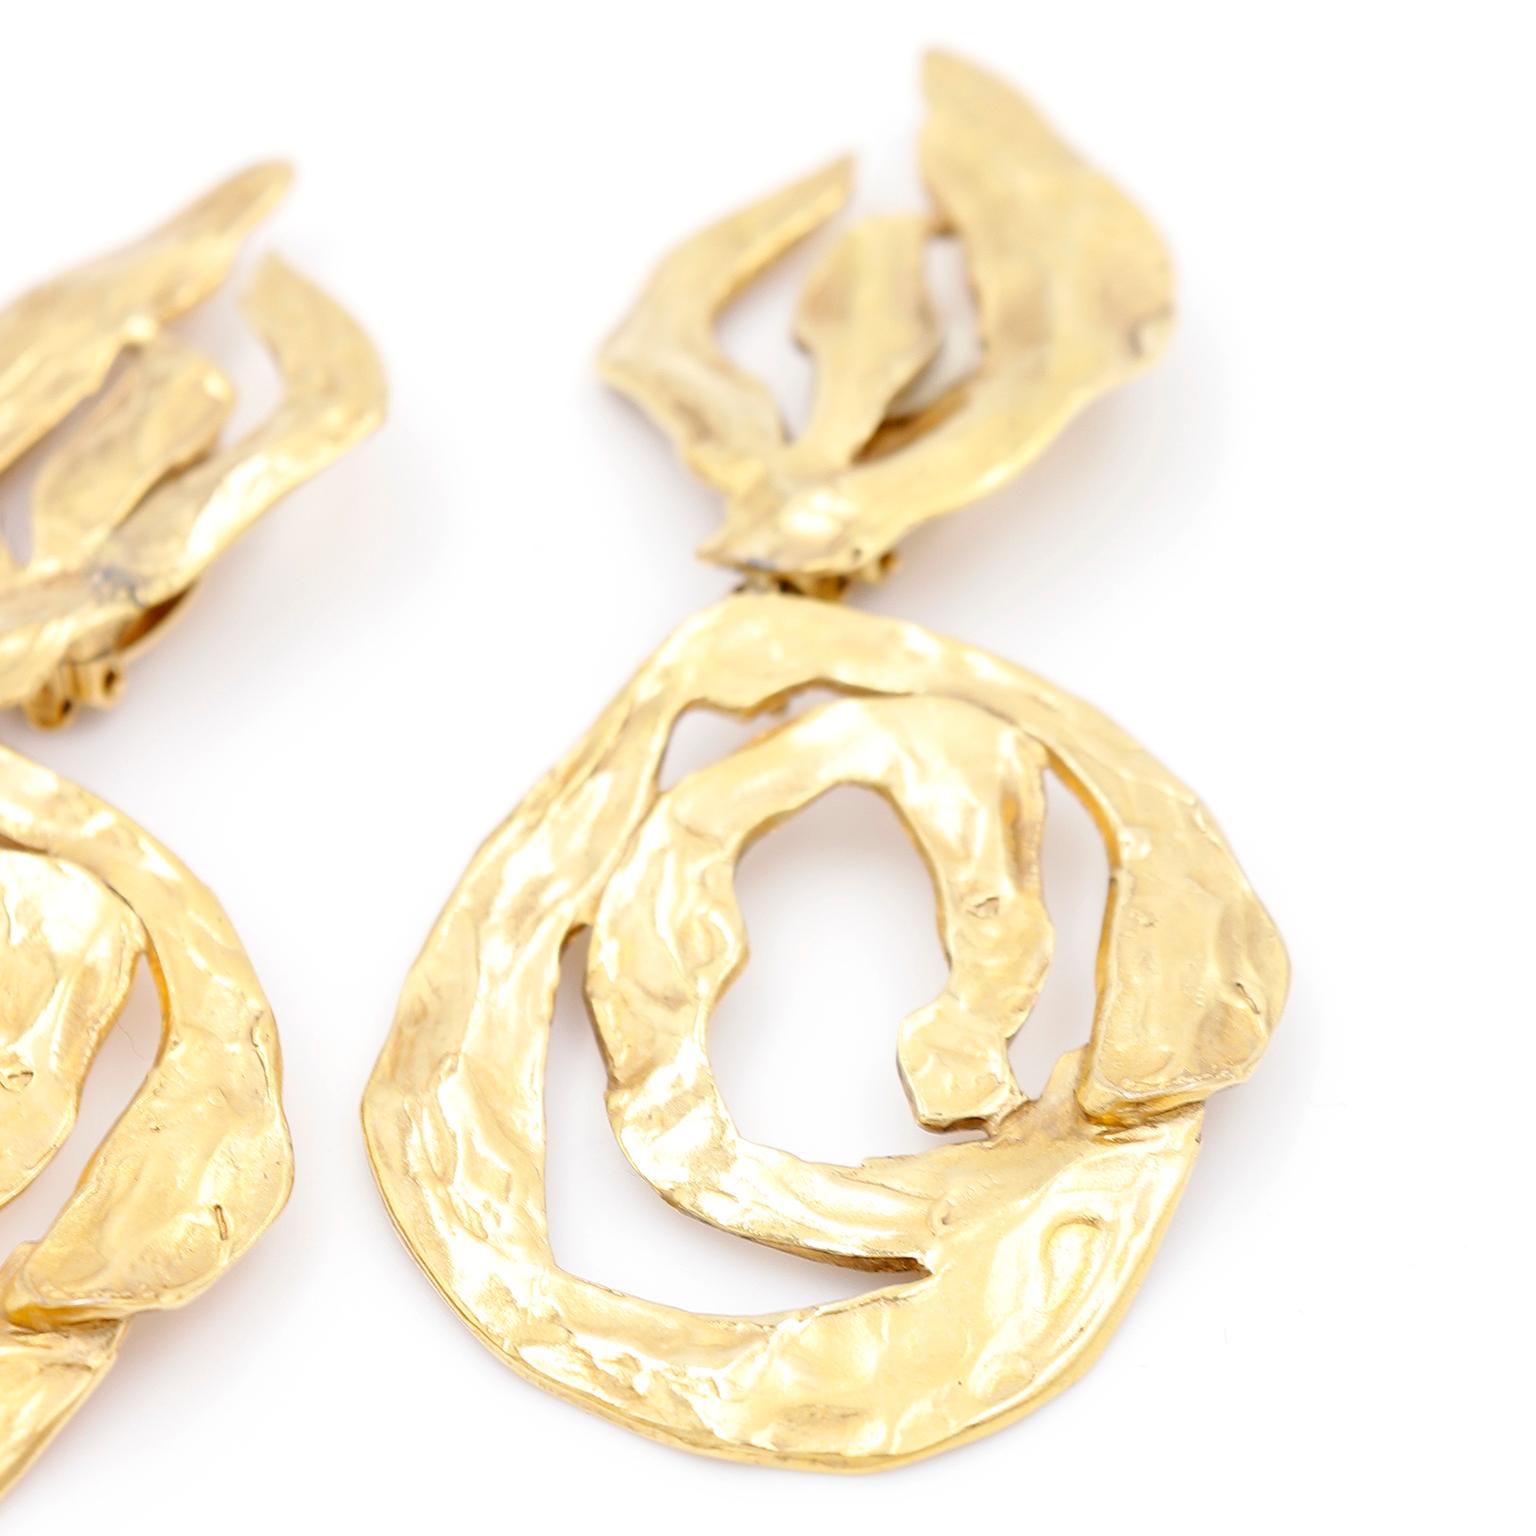 Huge YSL Vintage Gold Statement Earrings Yves Saint Laurent Abstract Clip Ons In Excellent Condition For Sale In Portland, OR